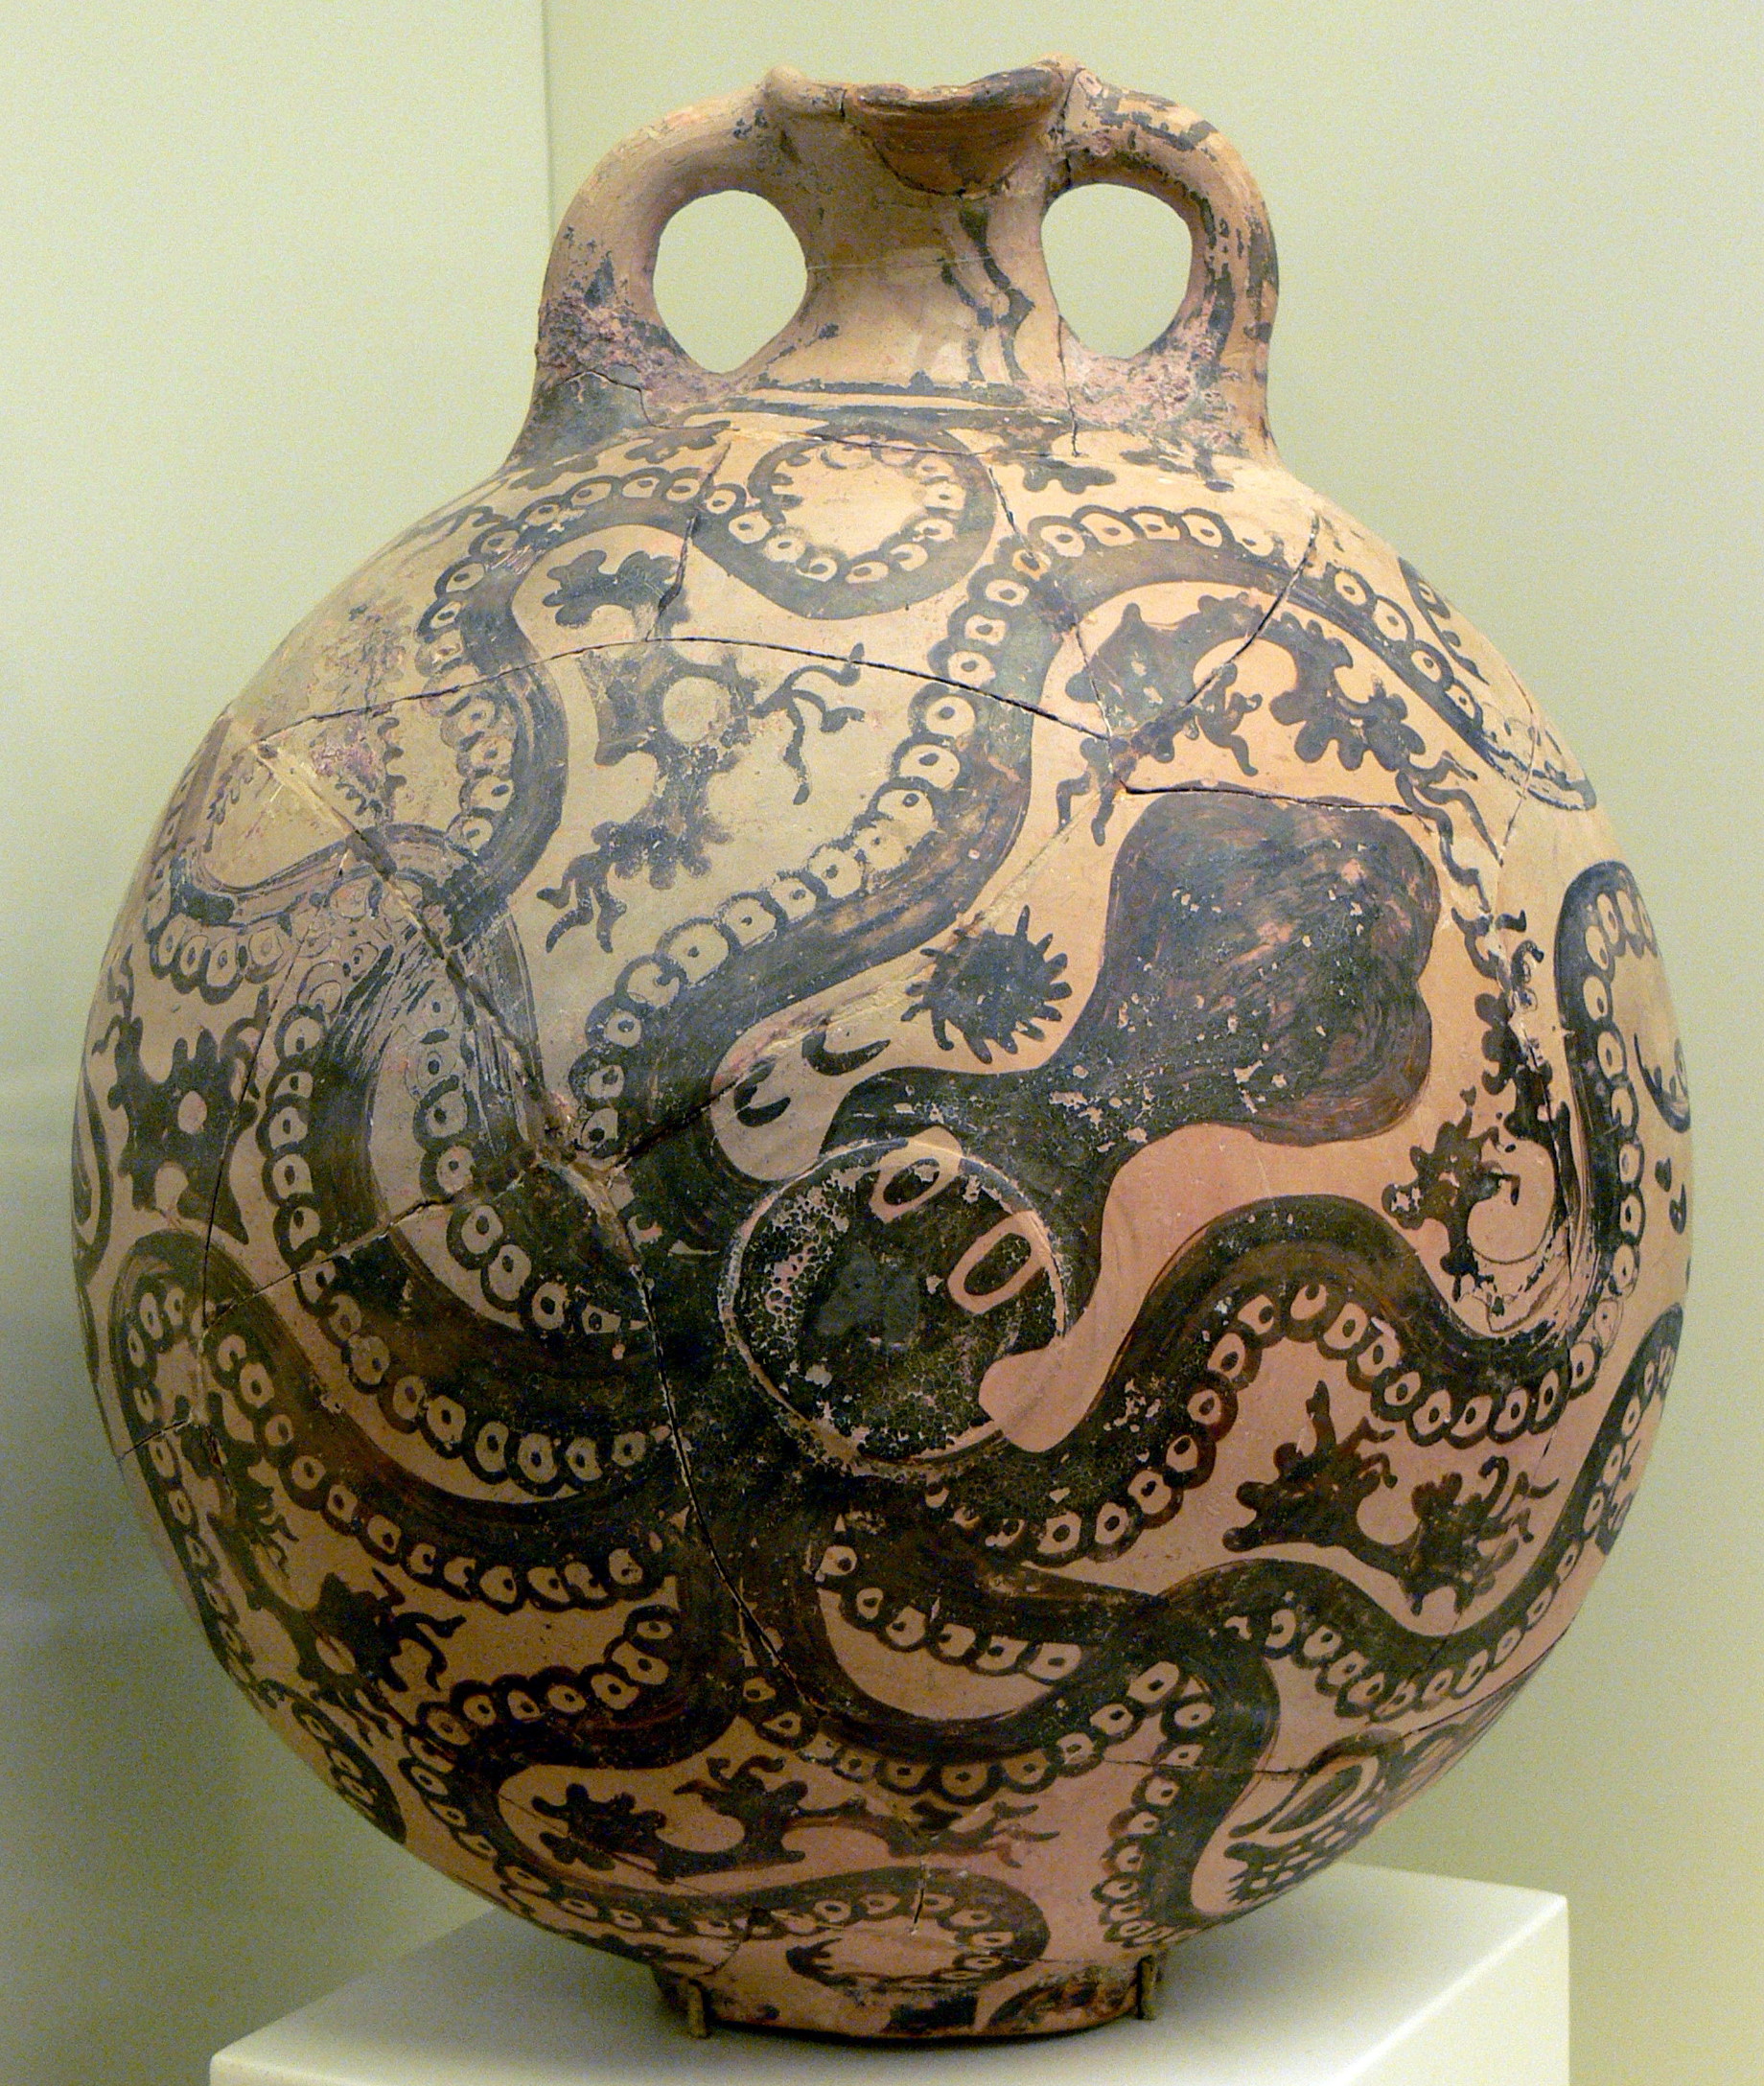 An octopus with other sea elements painted on a round clay vessel